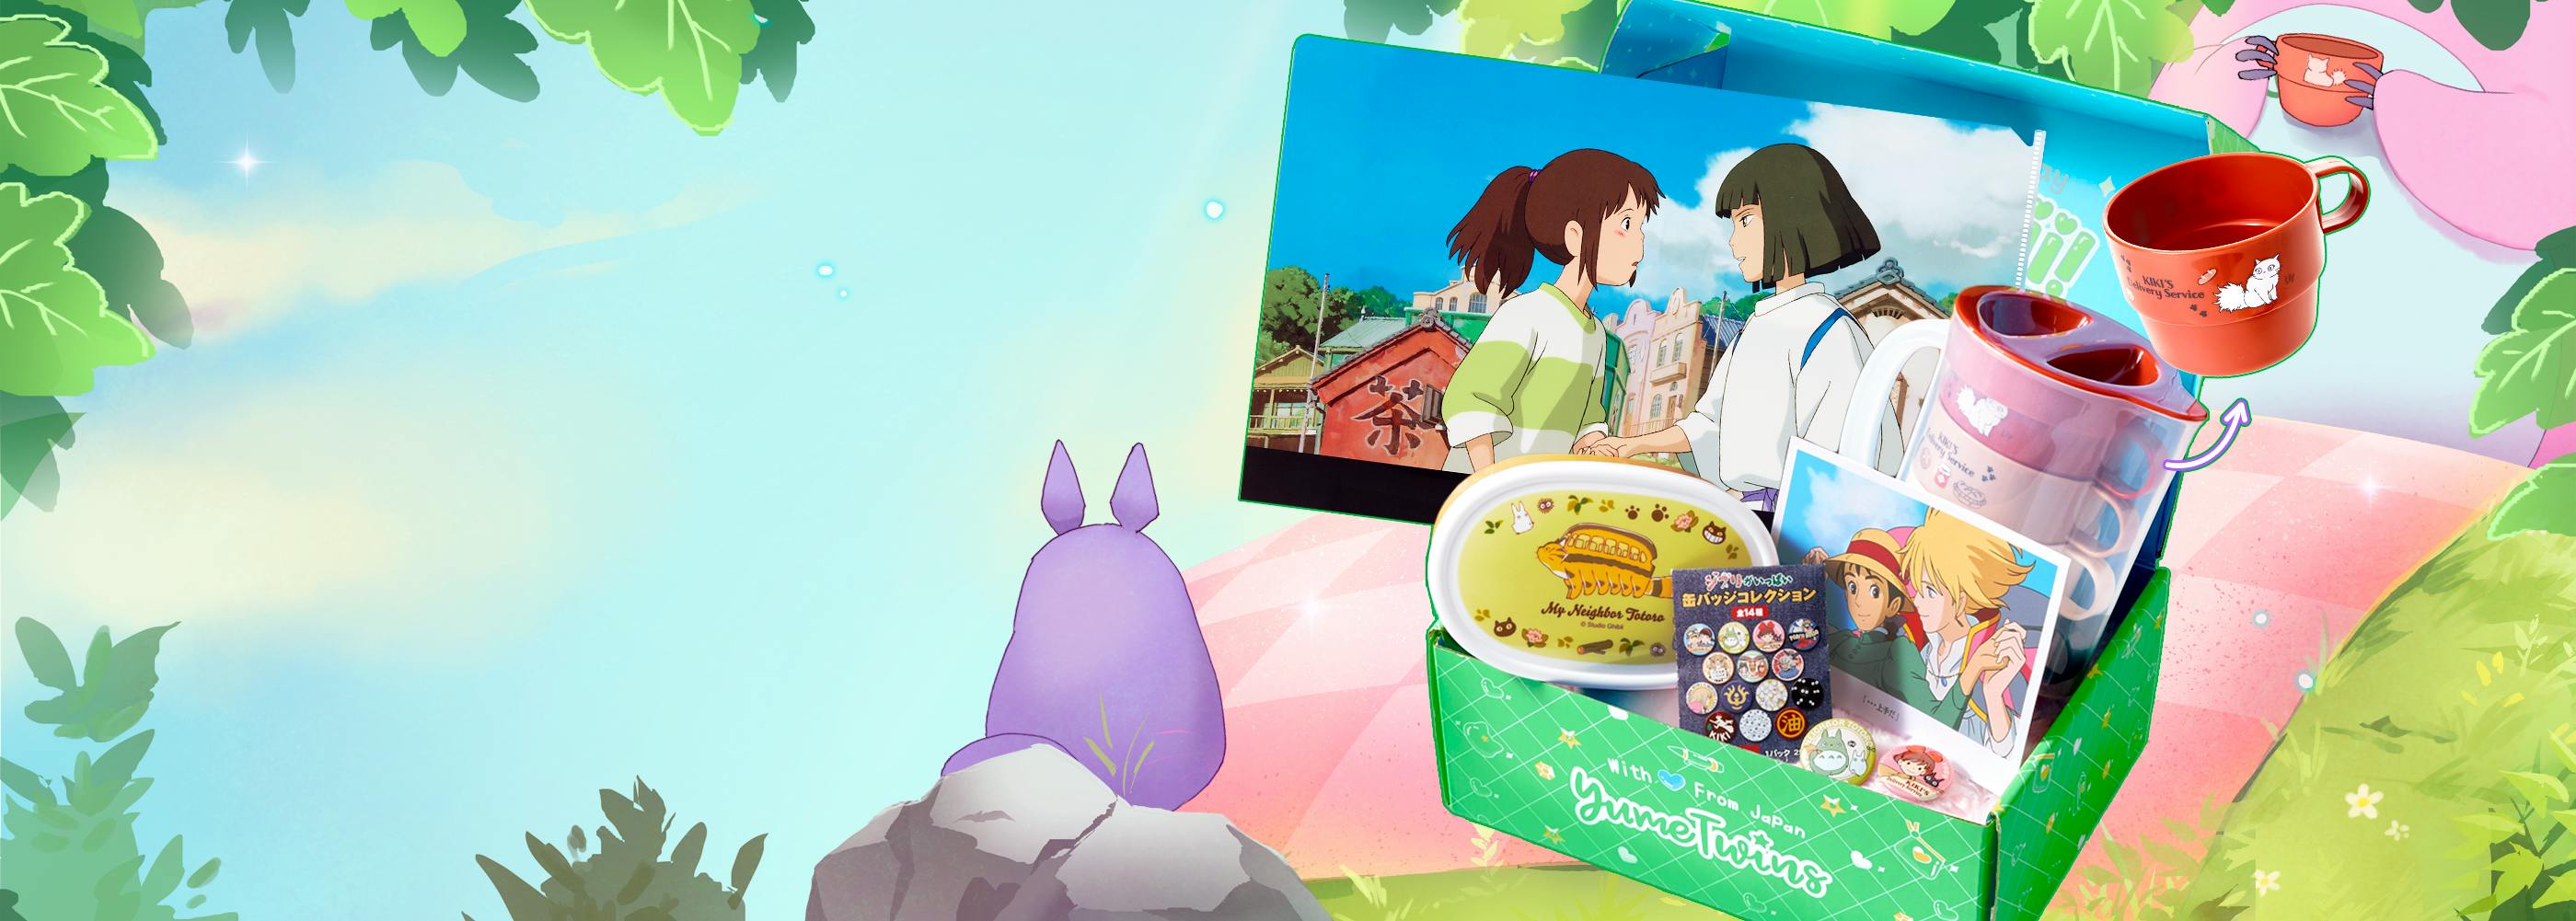 Sign up by August 15th to get your My Ghibli Journey box straight from Japan featuring Japan-exclusive Ghibli goodies.